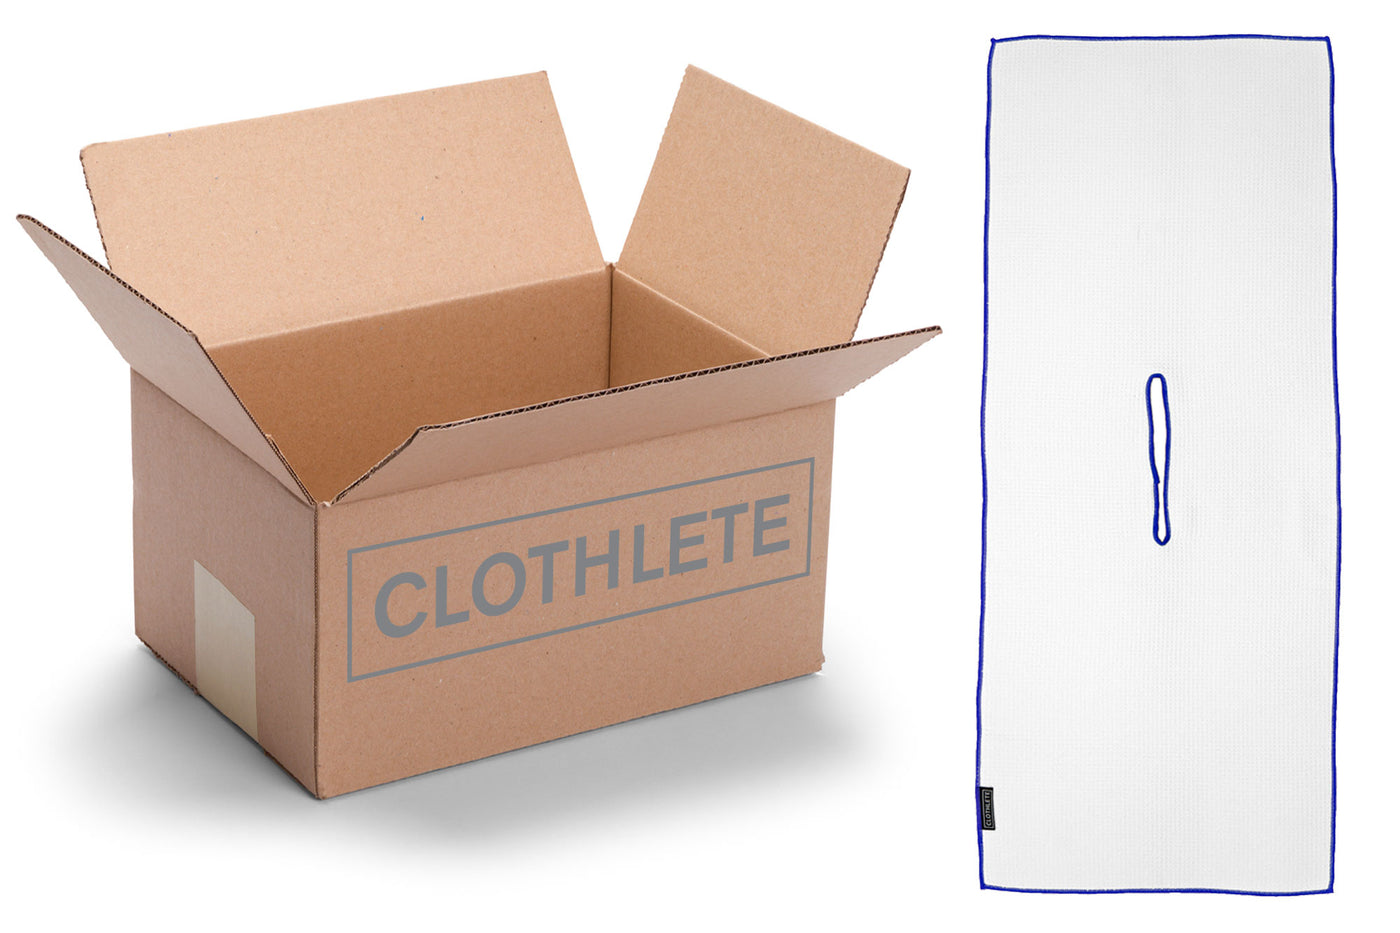 Cardboard bulk box of golf towels with center cut hole. Towels made from white microfiber with a blue trim. Towels sized 16 inches by 40 inches.